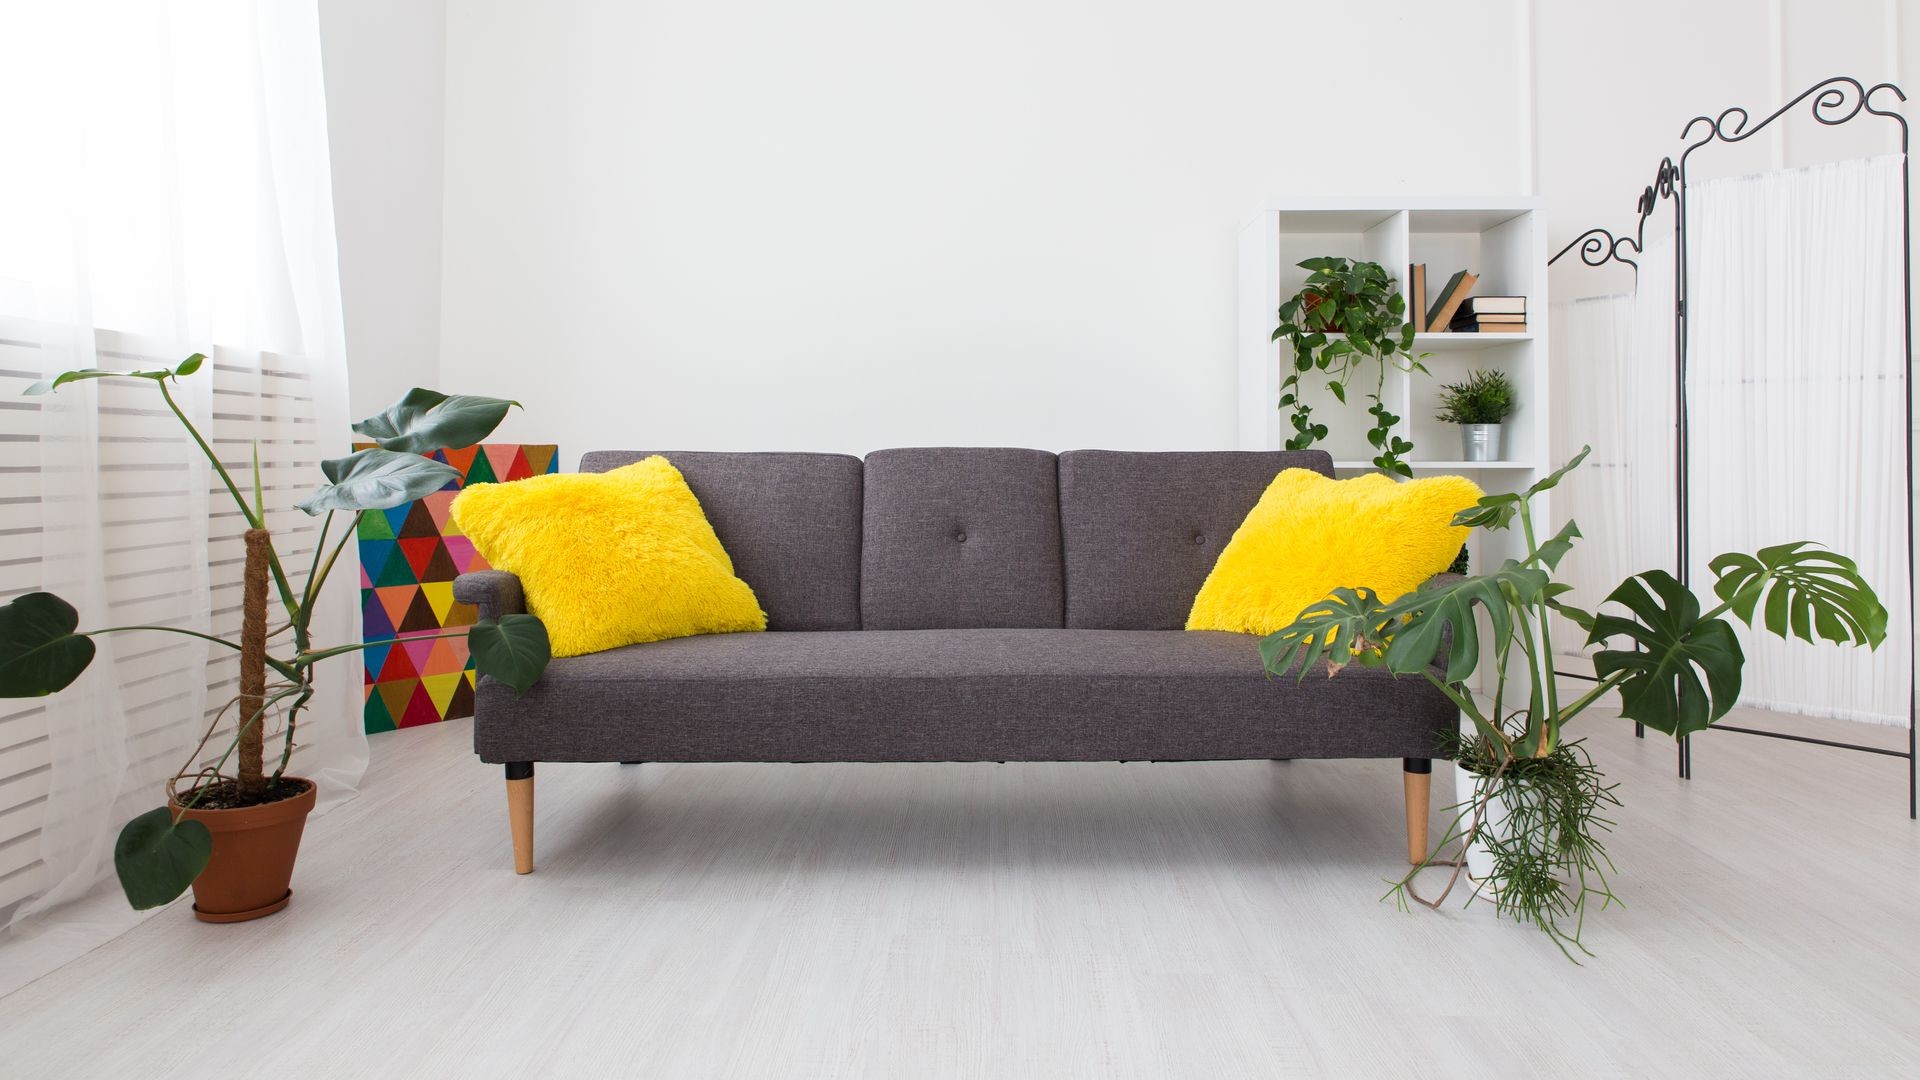 modern studio apartment with living plants. bright colors in the interior. gray sofa with yellow pillows.